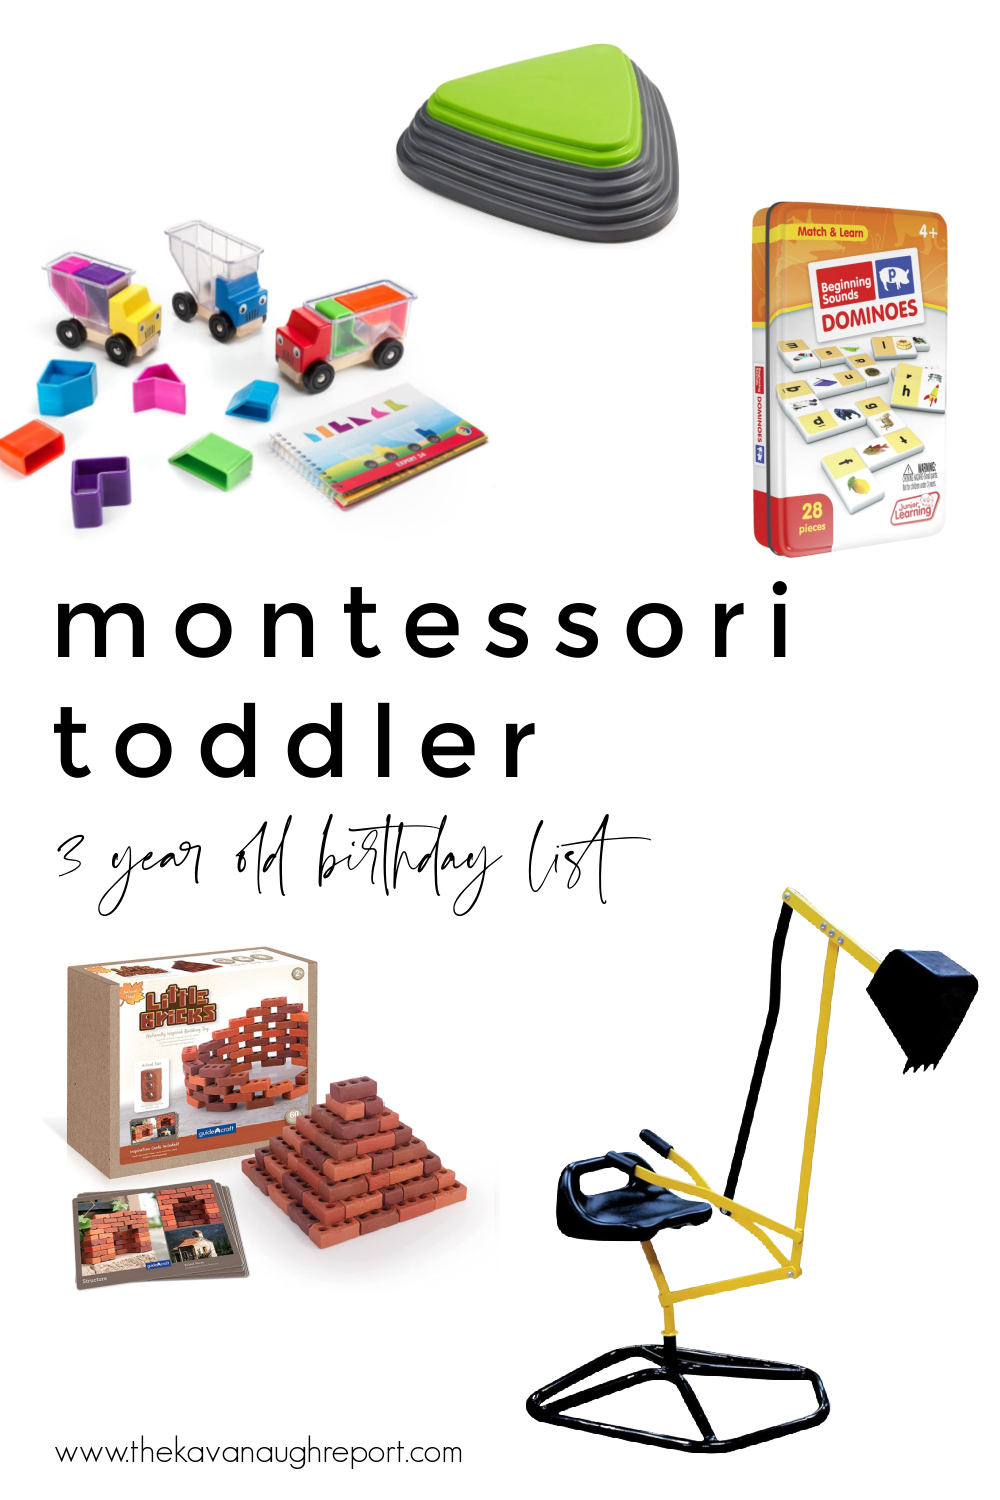 A look at our Montessori toddler's 3-year-old birthday list made from our own observations and his specific interests